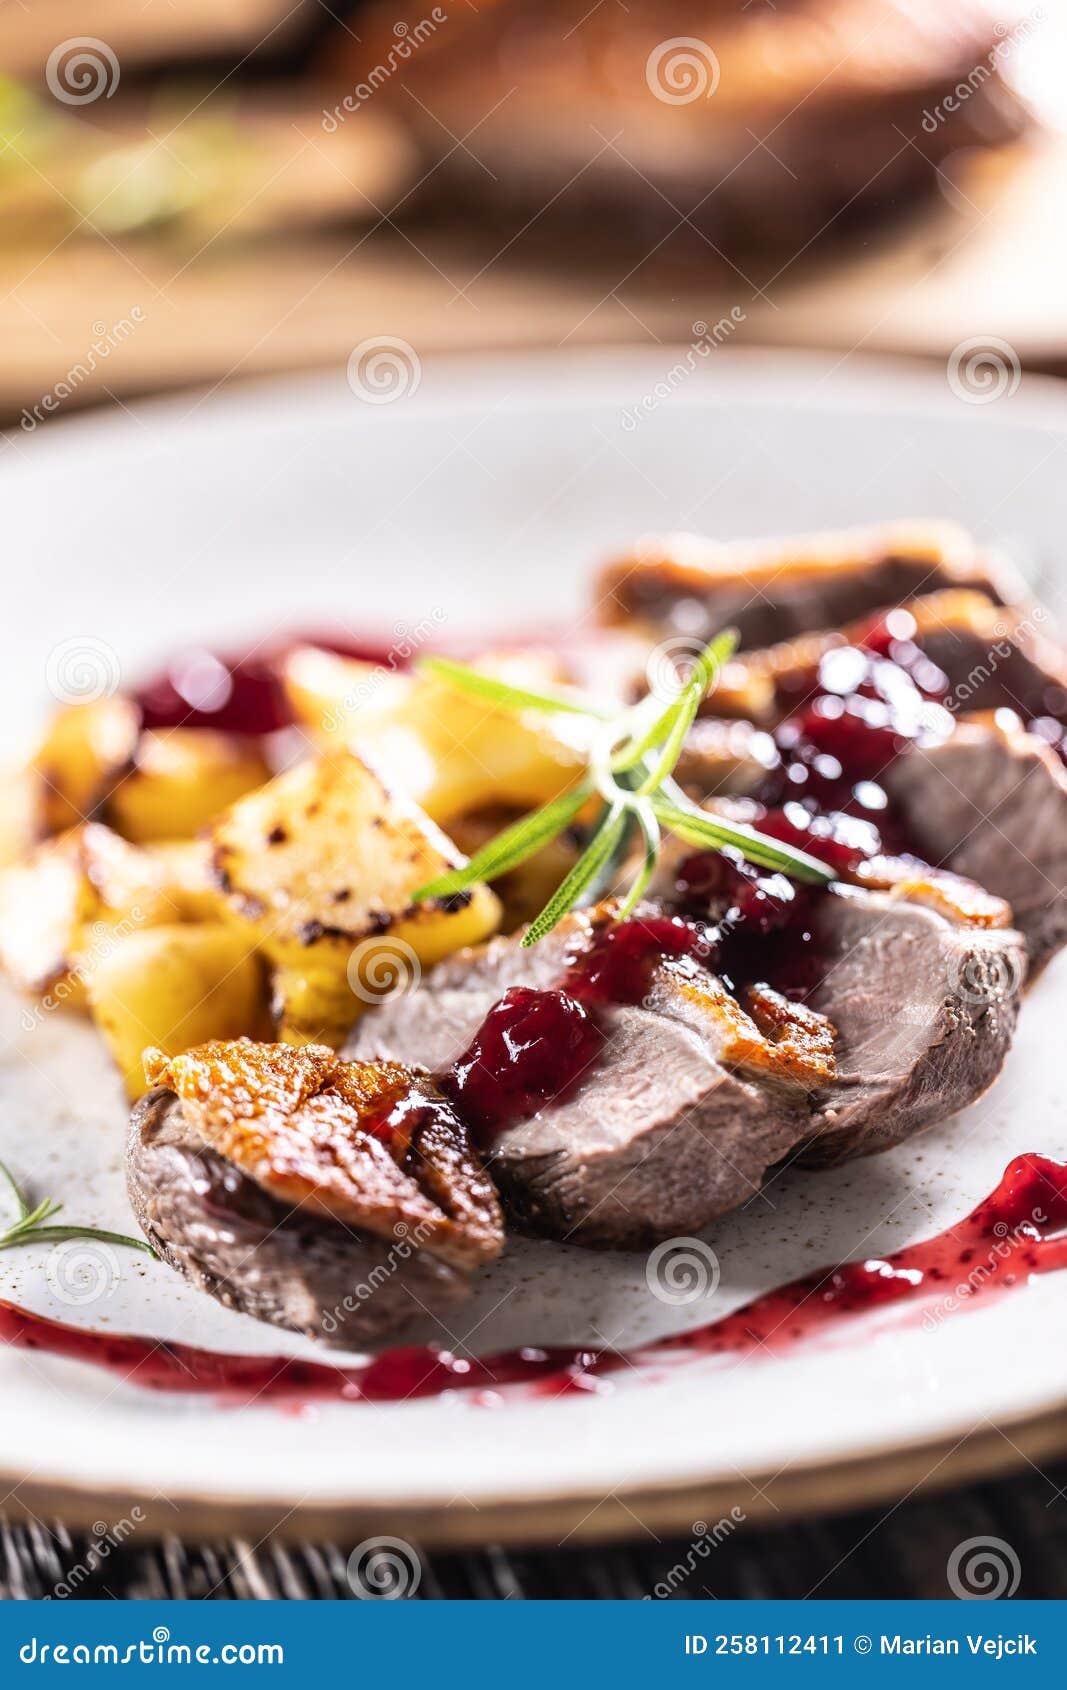 culinarily prepared duck breast with baked potatoes and cranberry cauce